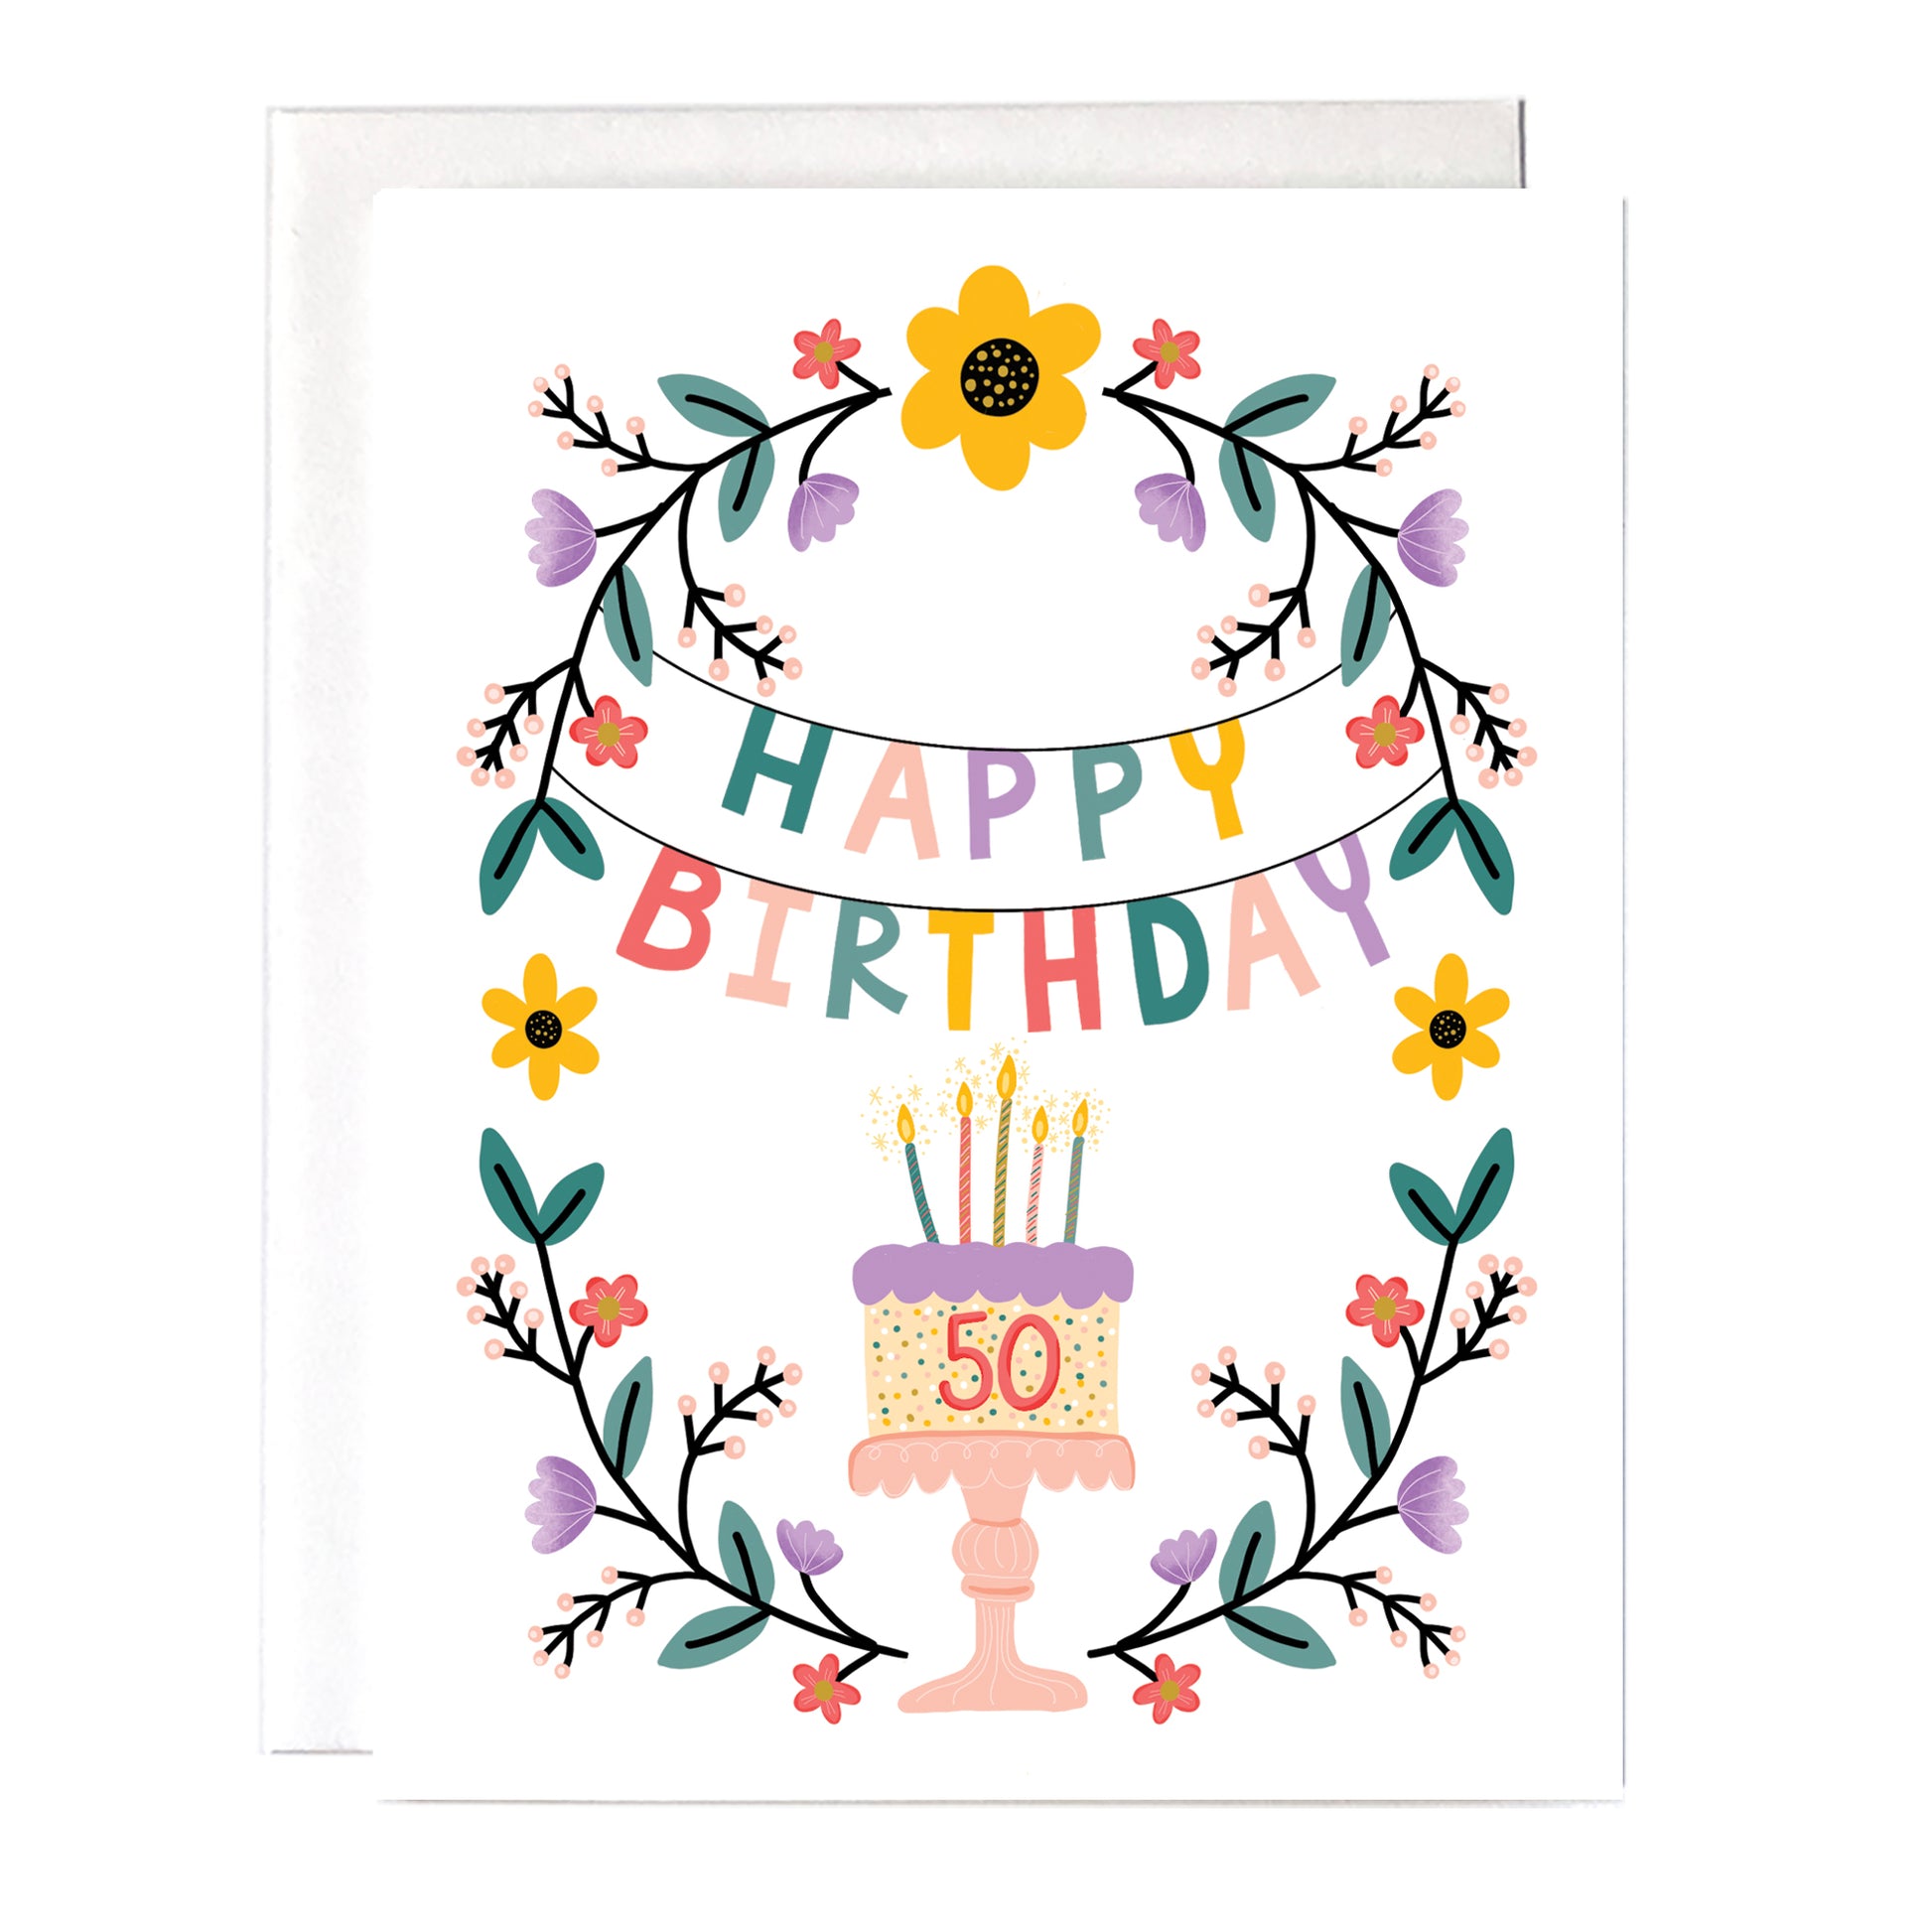 50th Birthday Card with beautiful floral design and birthday cake. Size A2 greeting card (4.25" x 5.5") with envelope, blank Inside. All cards are designed and Illustrated with love by me, Anna Fox, and are printed at my friendly neighborhood print shop in Denver, CO.